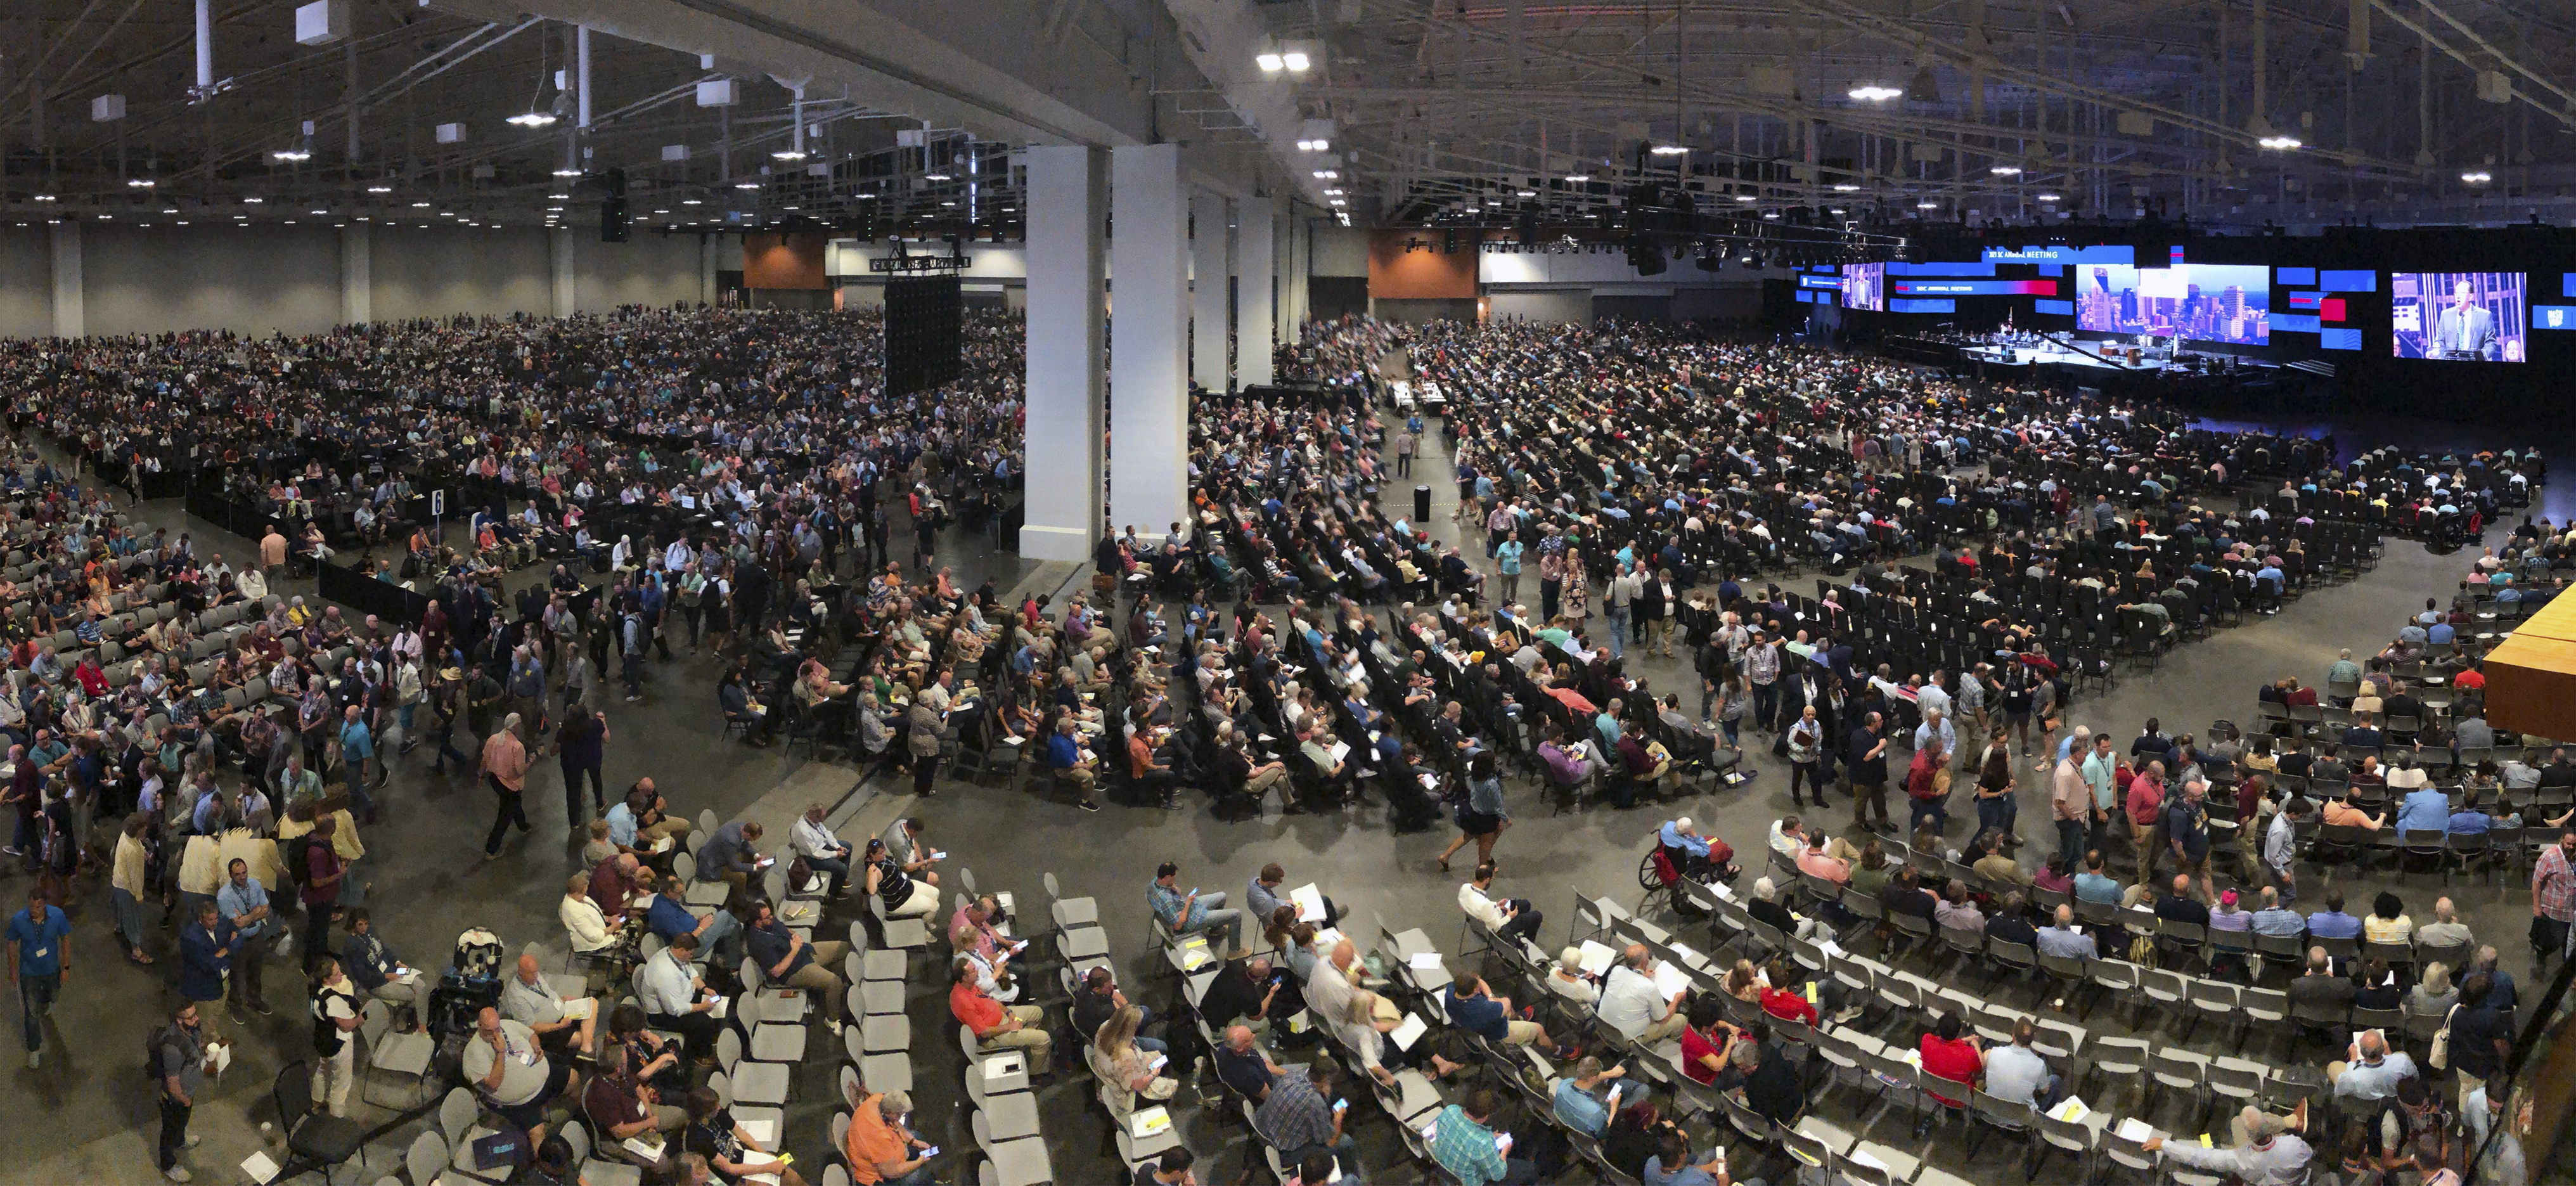 In this June 16, 2021, file photo, people attend the morning session of the Southern Baptist Convention annual meeting in Nashville, Tennessee. At that national SBC gathering in June, thousands of delegates sent the message that they did not want the Executive Committee to oversee an investigation of its own actions on how it handled sexual abuse allegations. (AP Photo/Mark Humphrey, File)